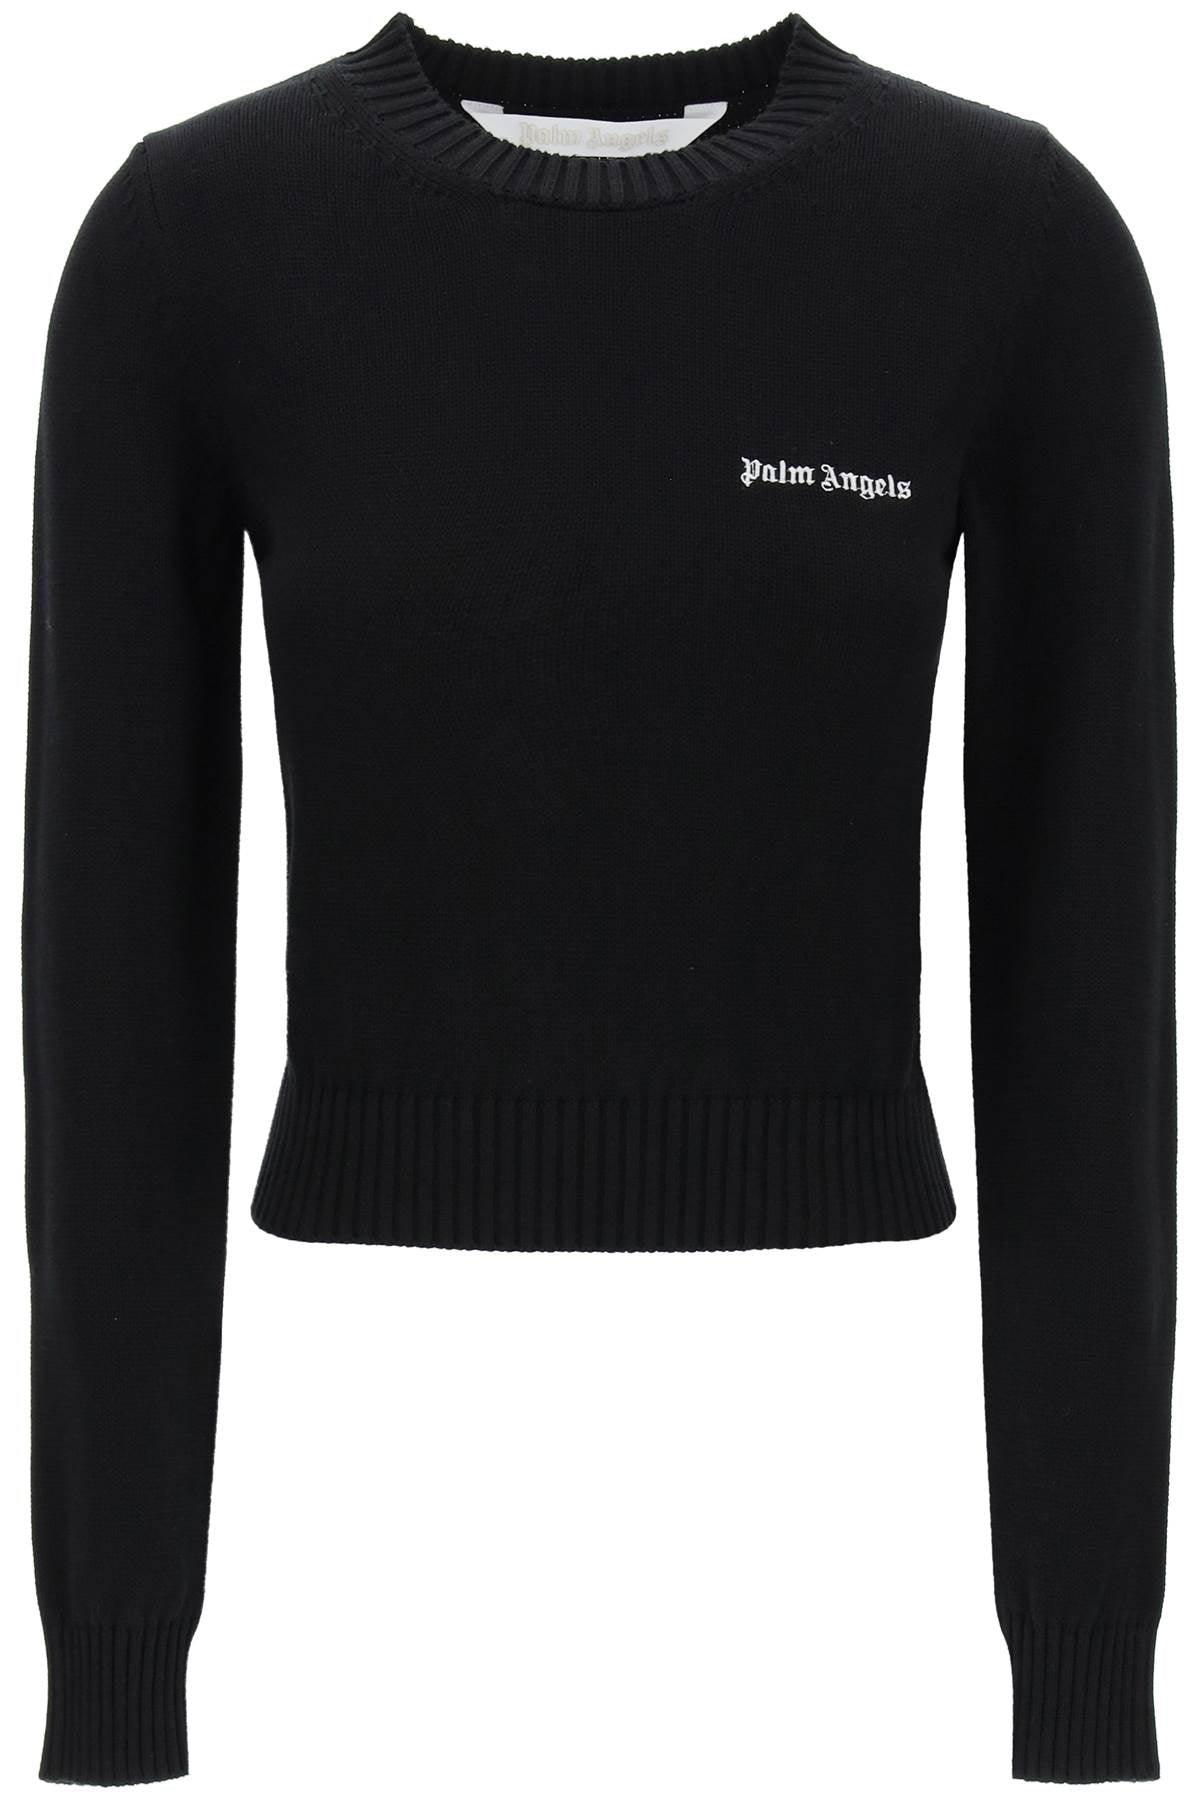 Palm Angels Cropped Pullover With Logo Embroidery - JOHN JULIA